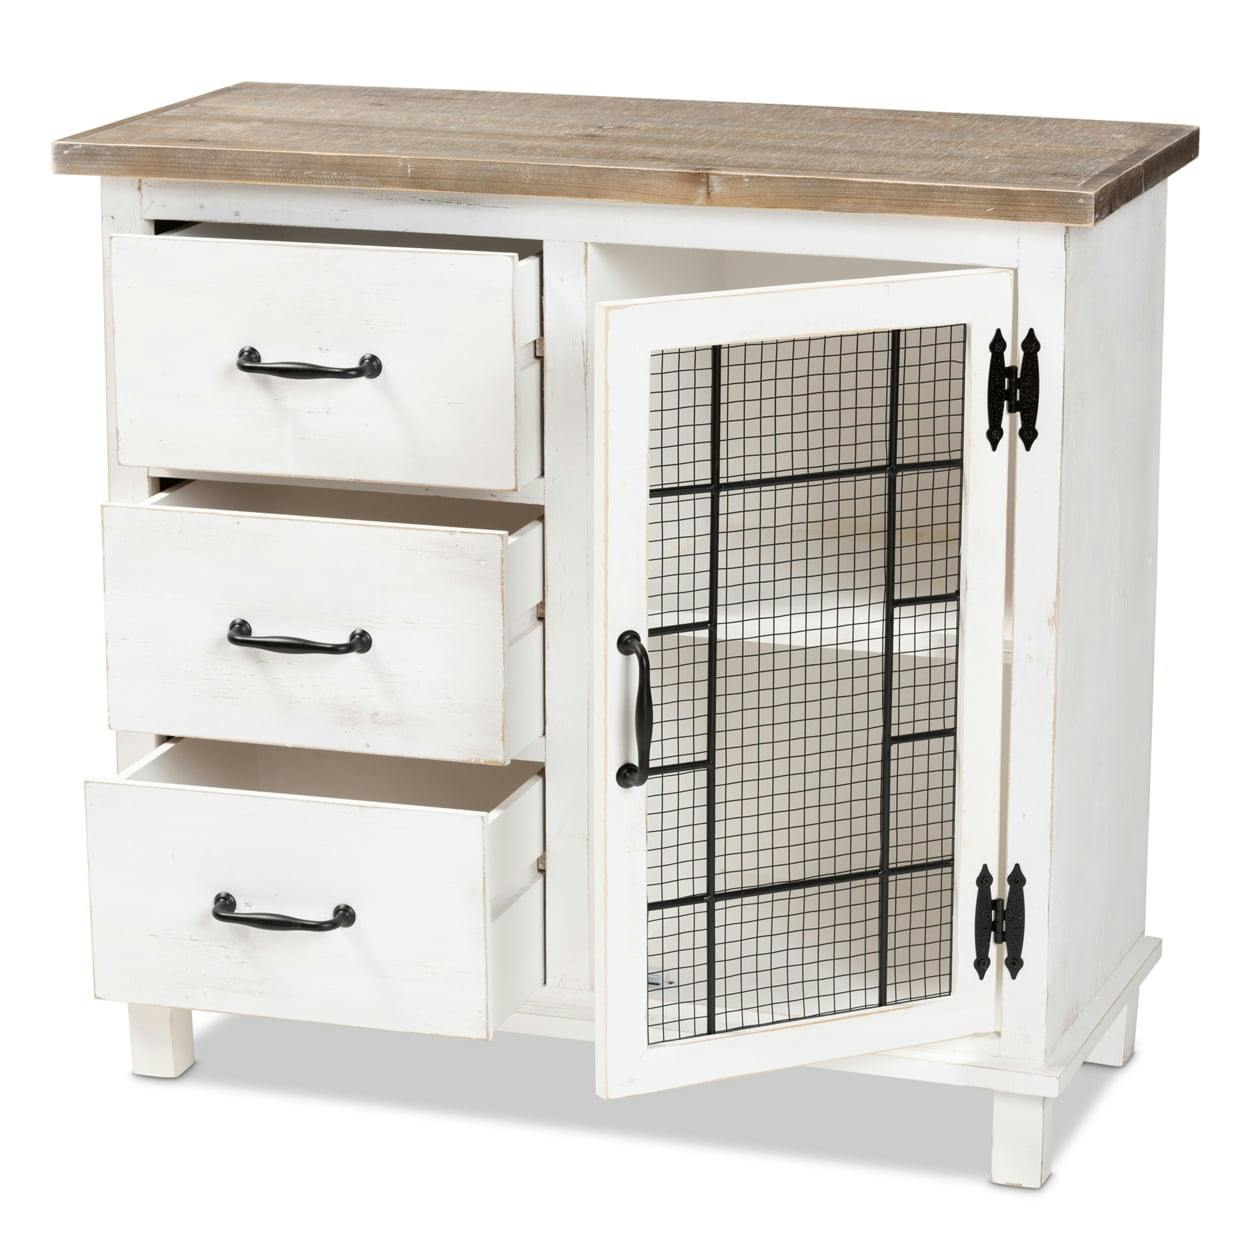 Faron Vintage Two-Tone White and Oak Brown Wood Cabinet with Metal Accents